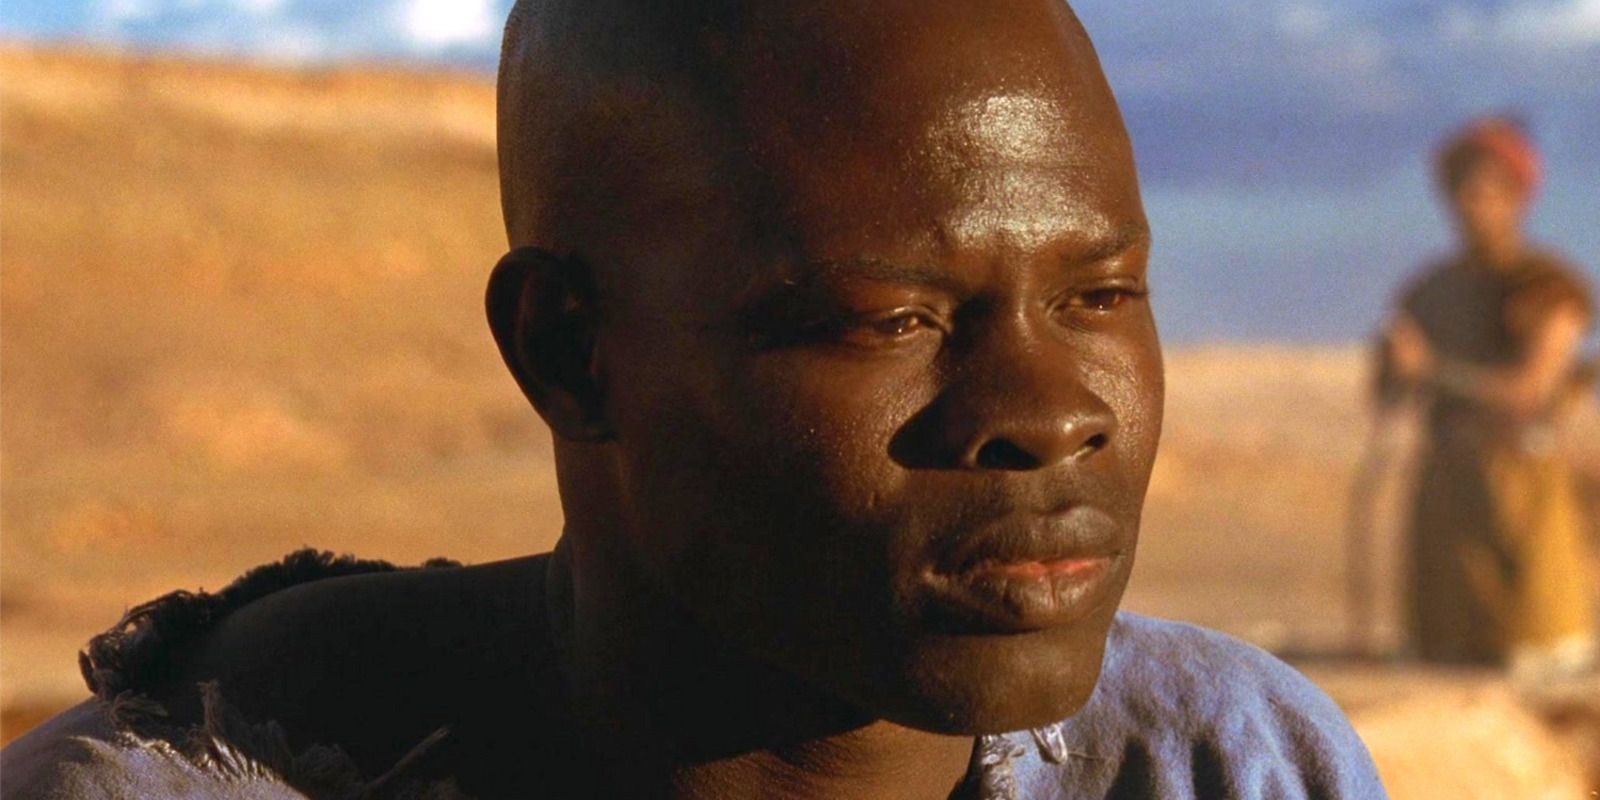 Djimon Hounsou's Juba is deep in thought during a scene in Gladiator